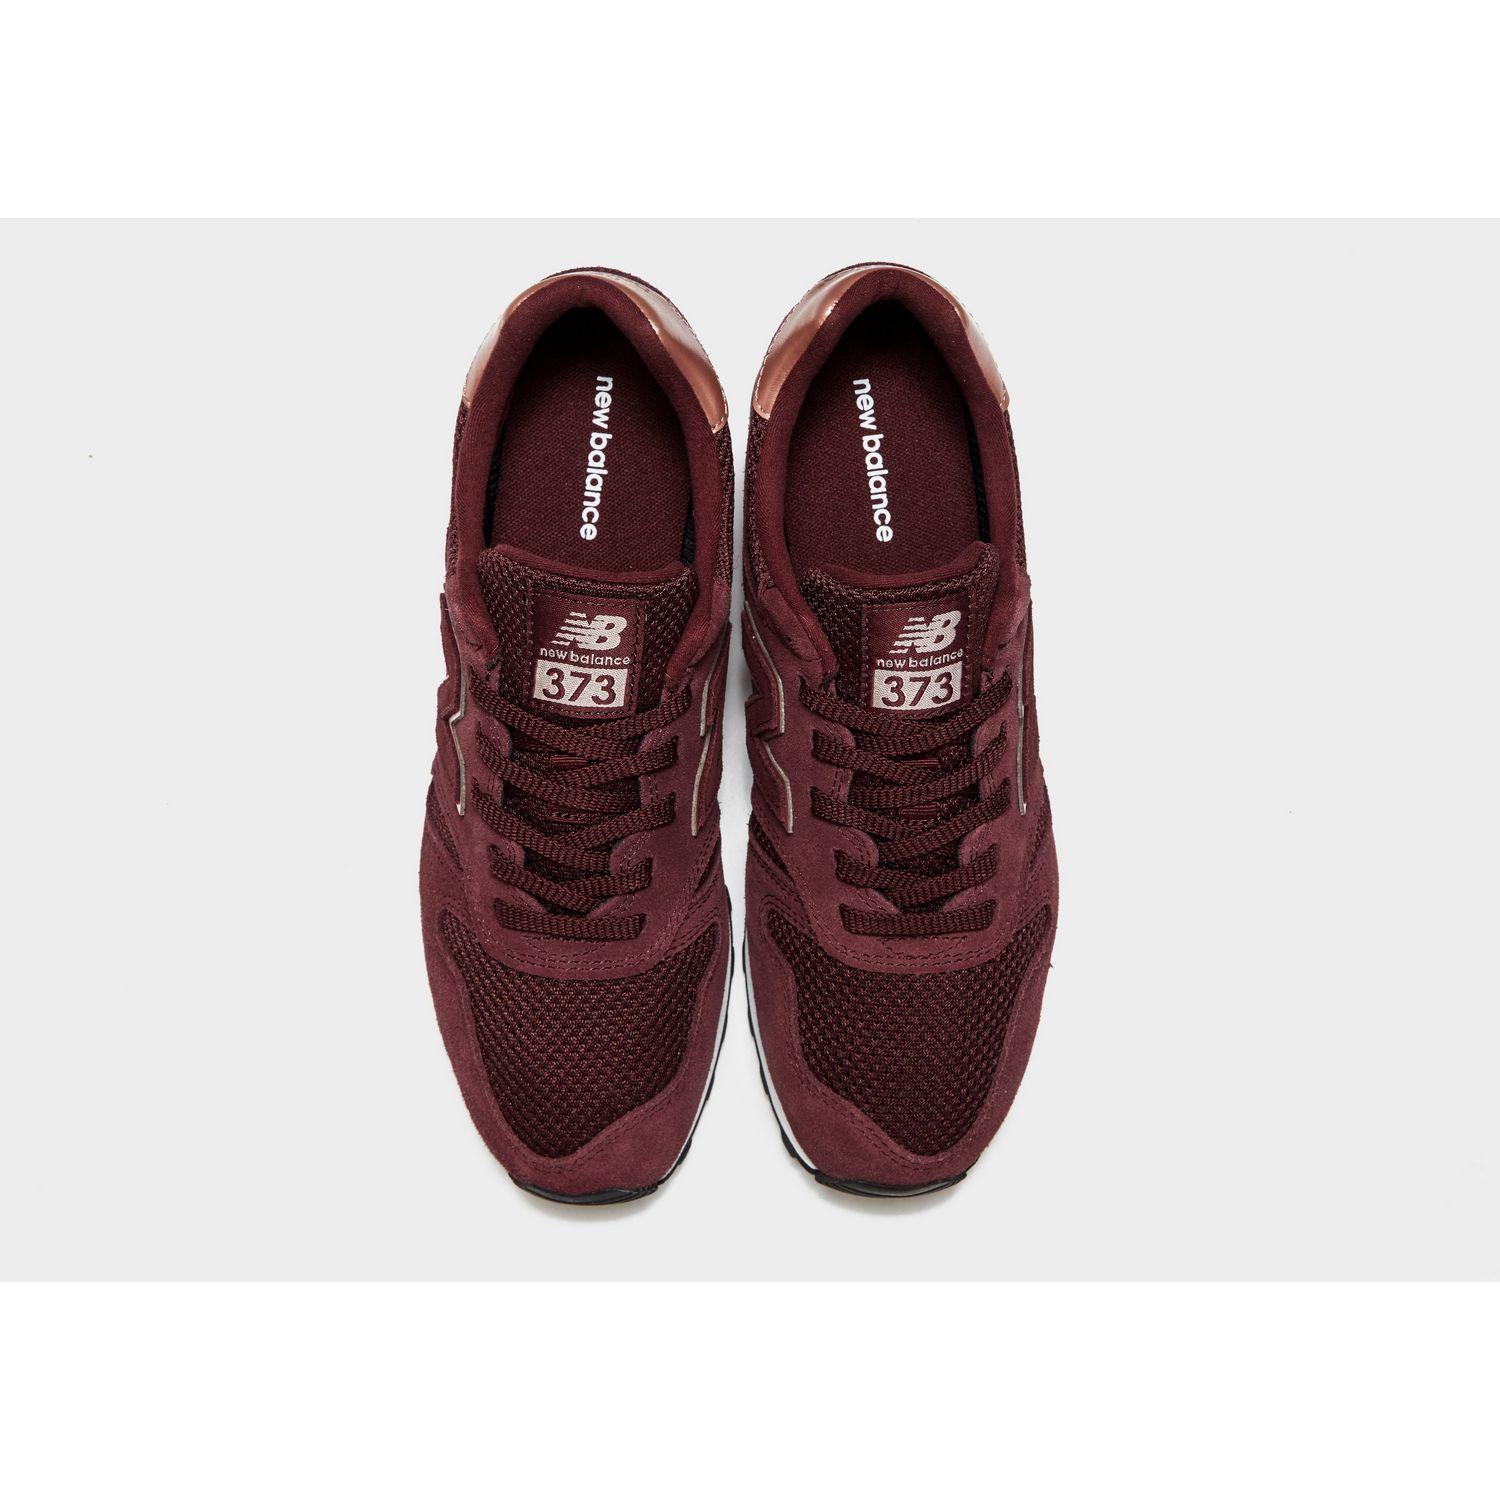 New Balance Suede 373 in Burgundy/Rose Gold (Red) - Lyst